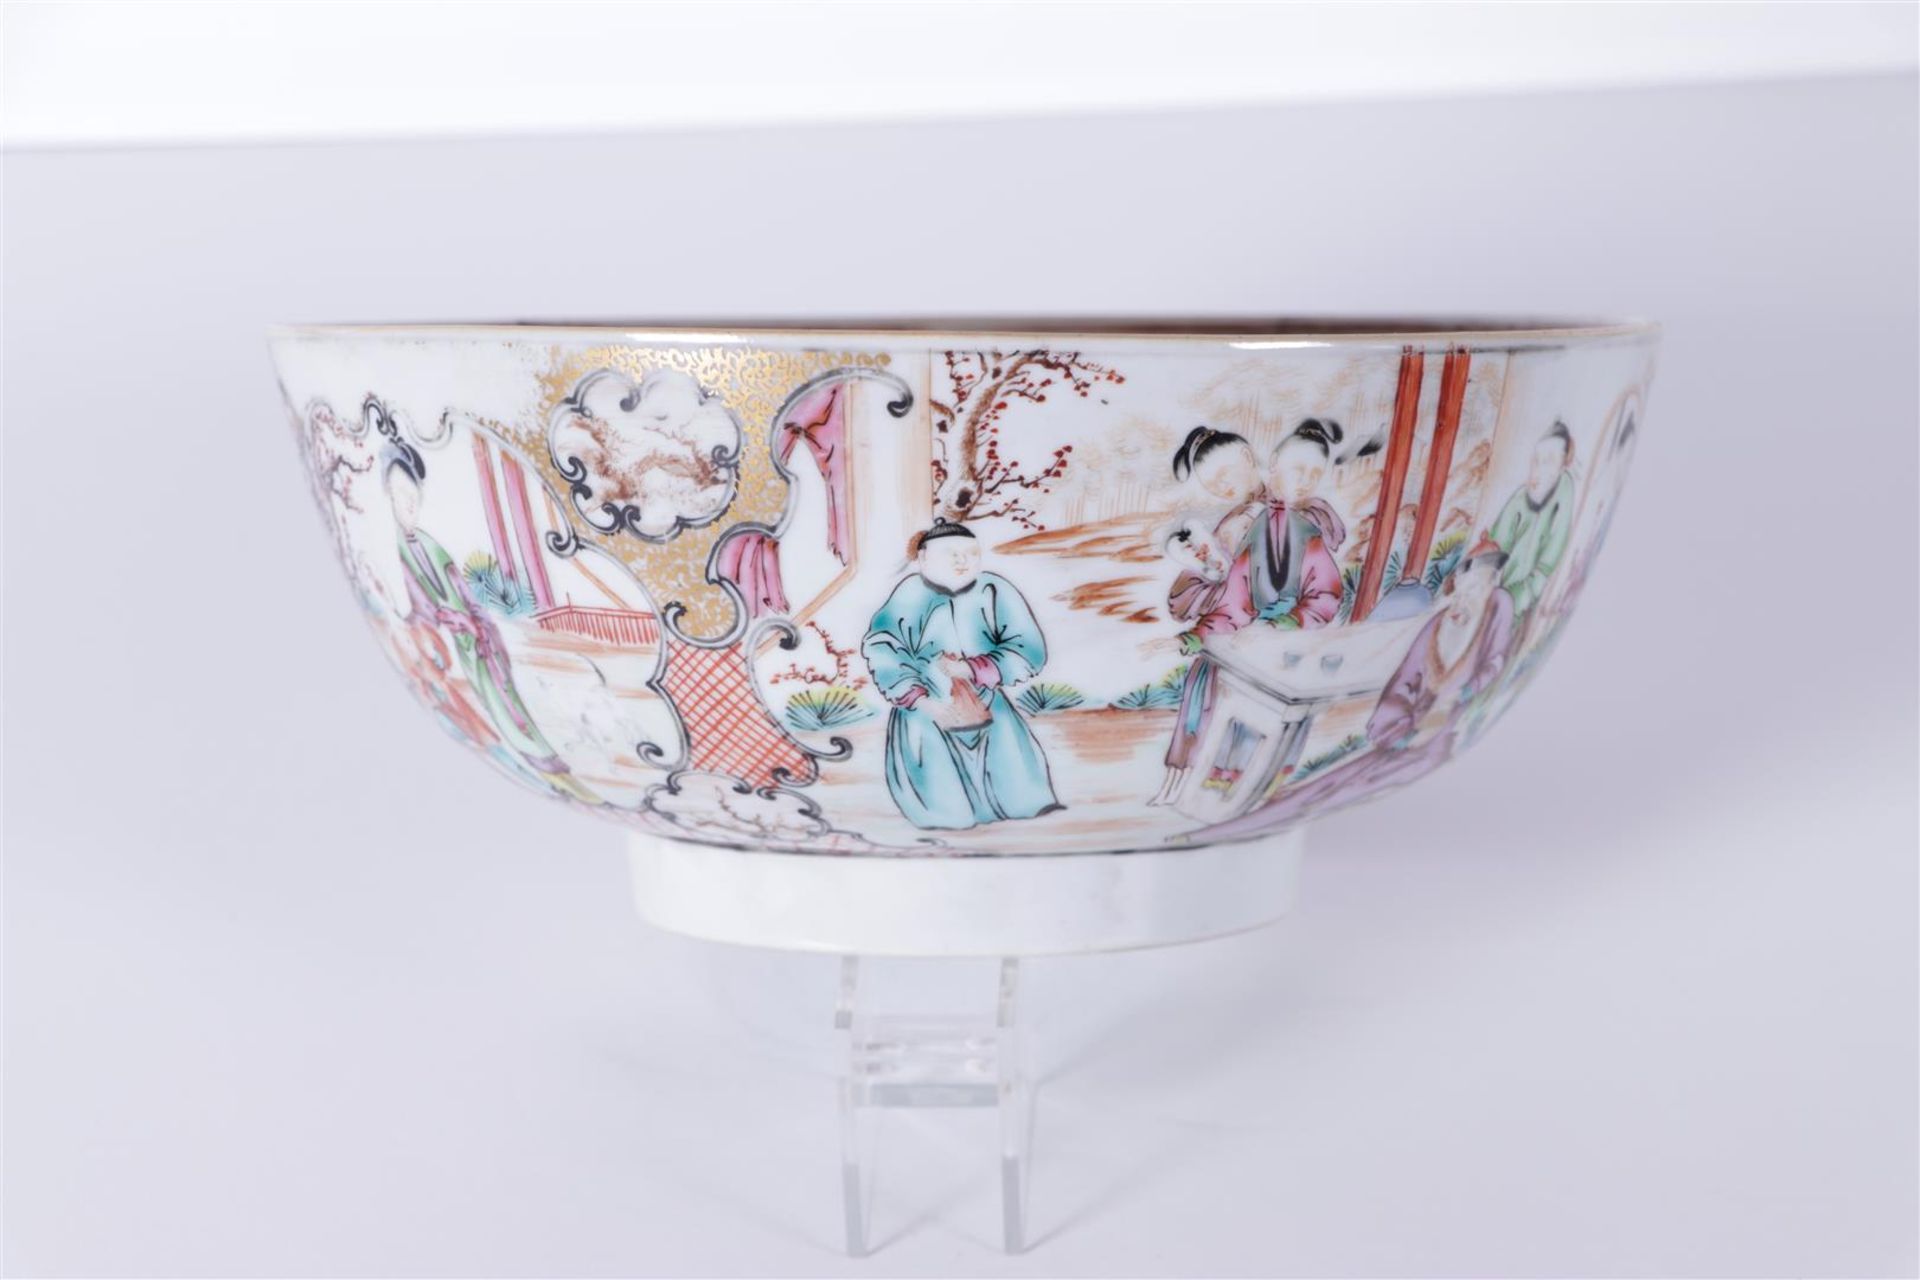 A large Chine de comdande bowl decorated with various figures. China, 18th century.
Diam. 26 cm. - Image 3 of 5